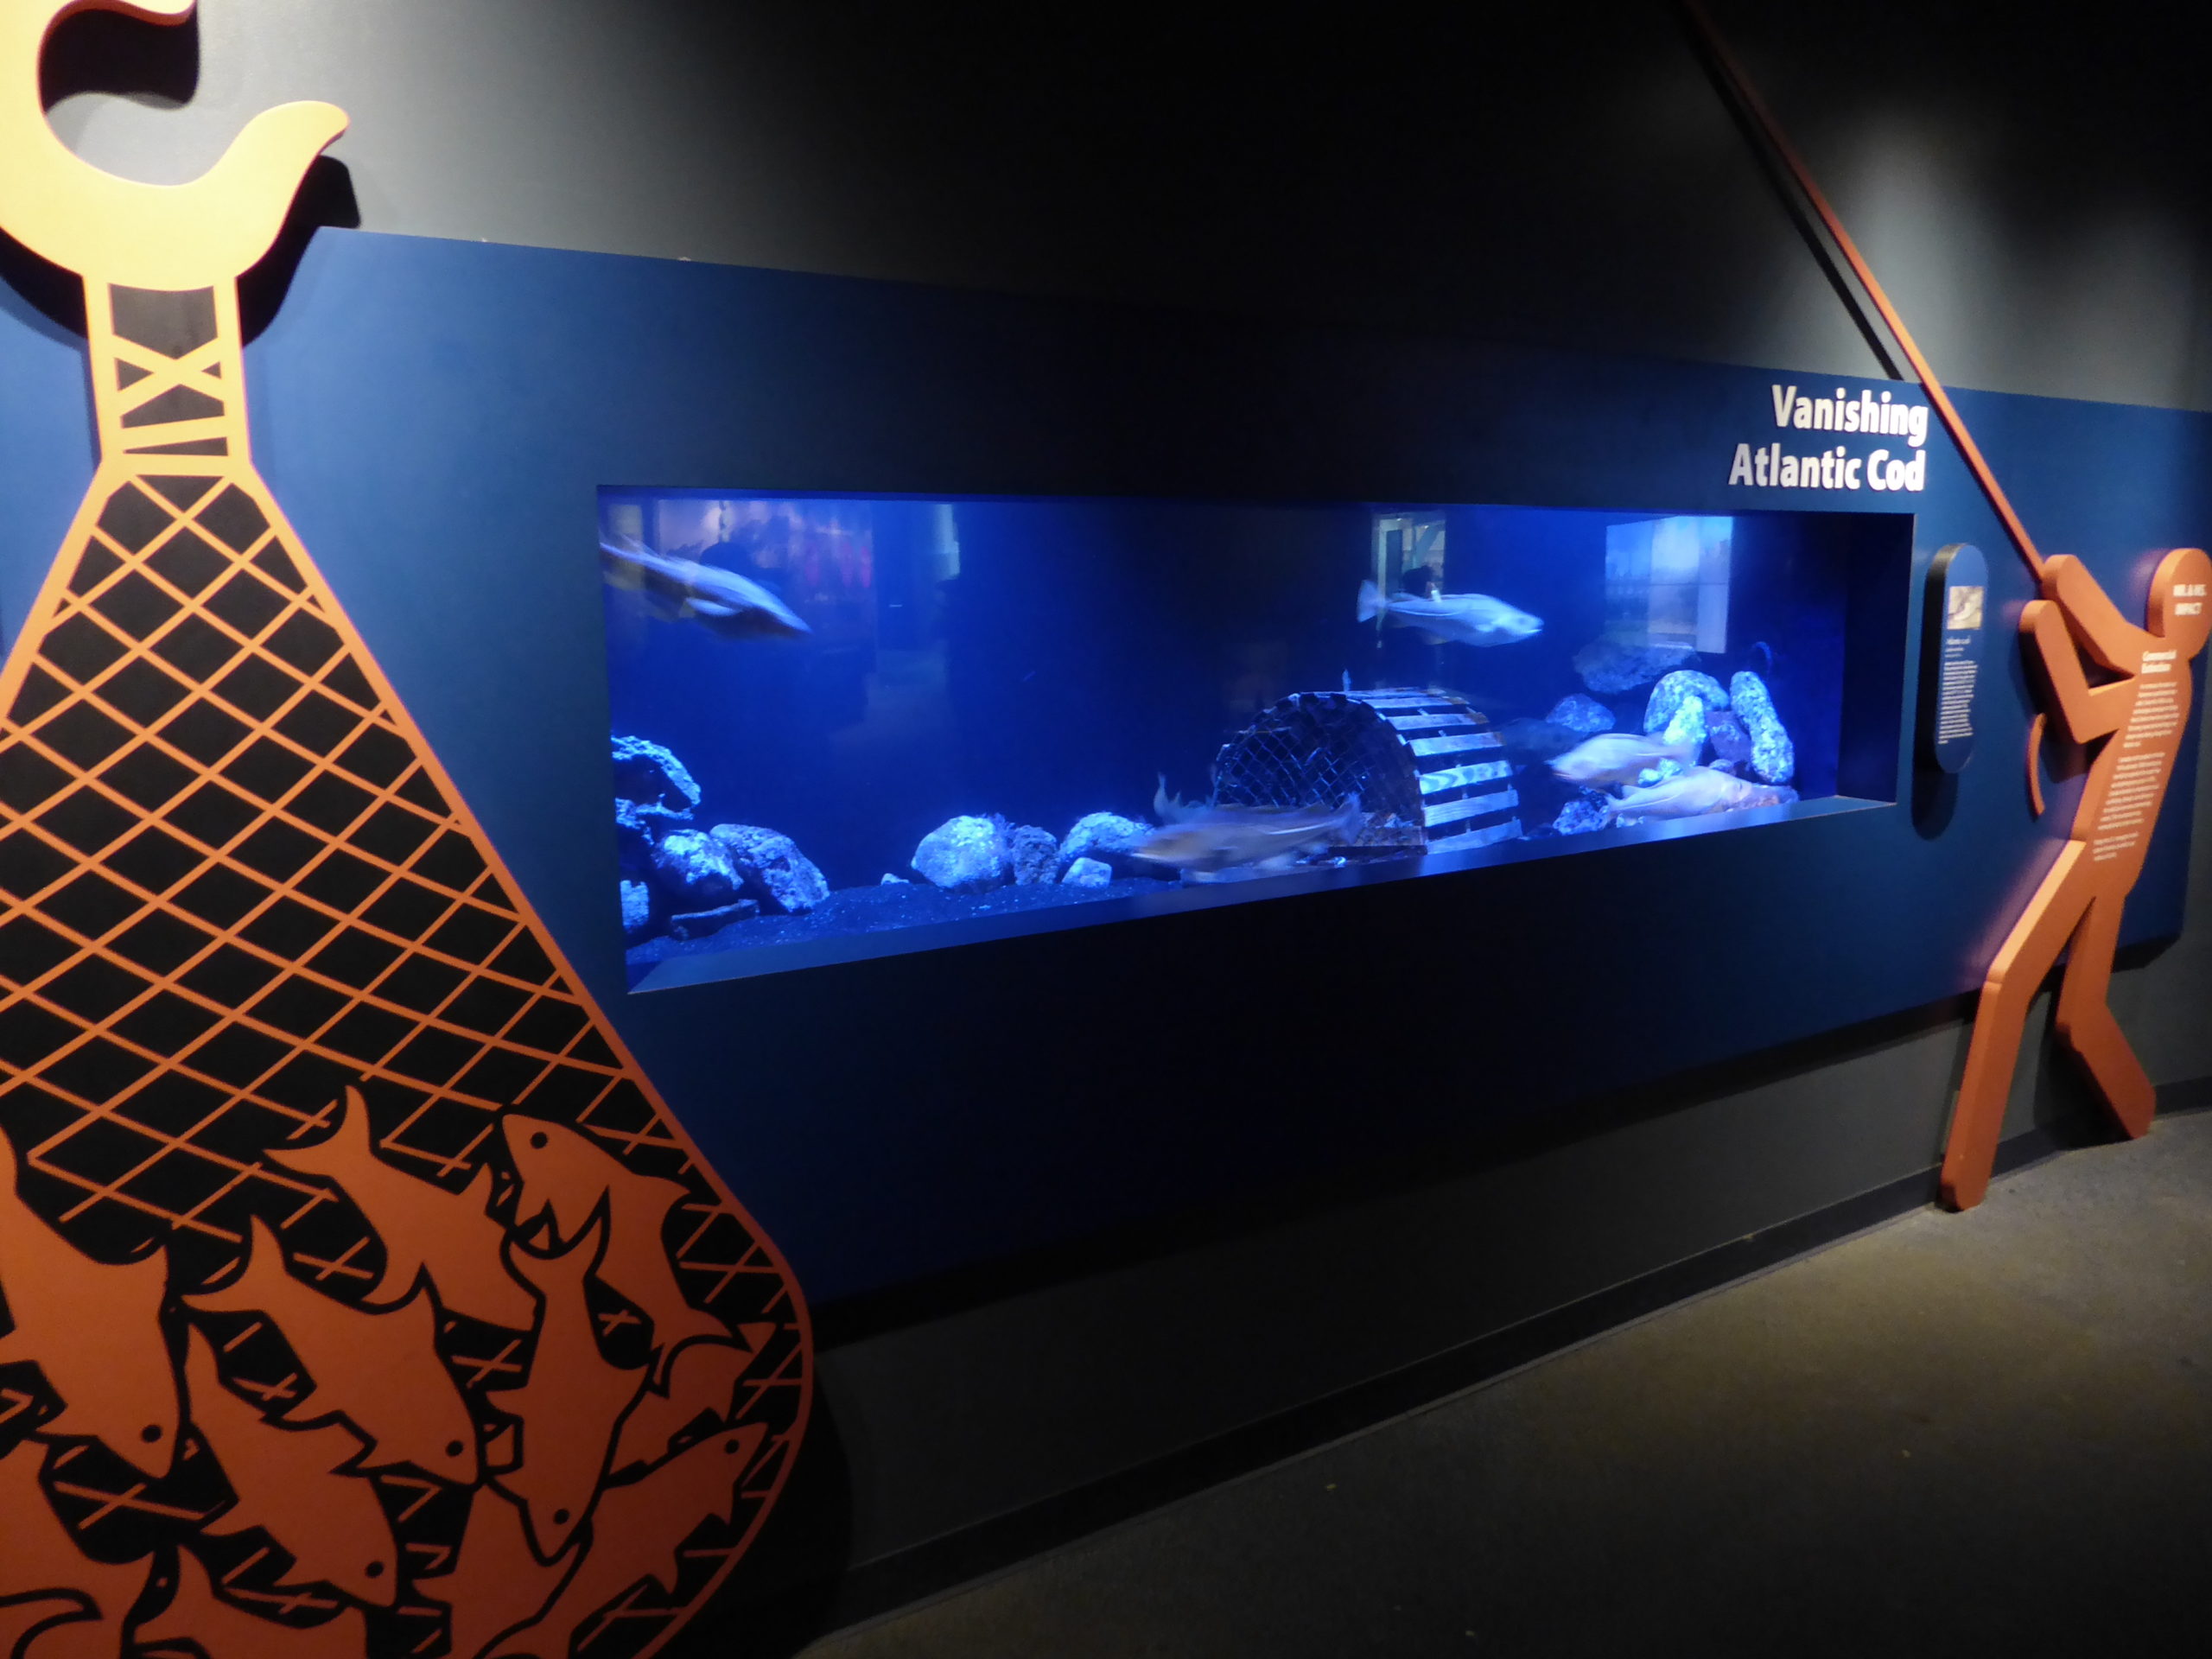 A combination of panels representing overfishing and endangered species tanks